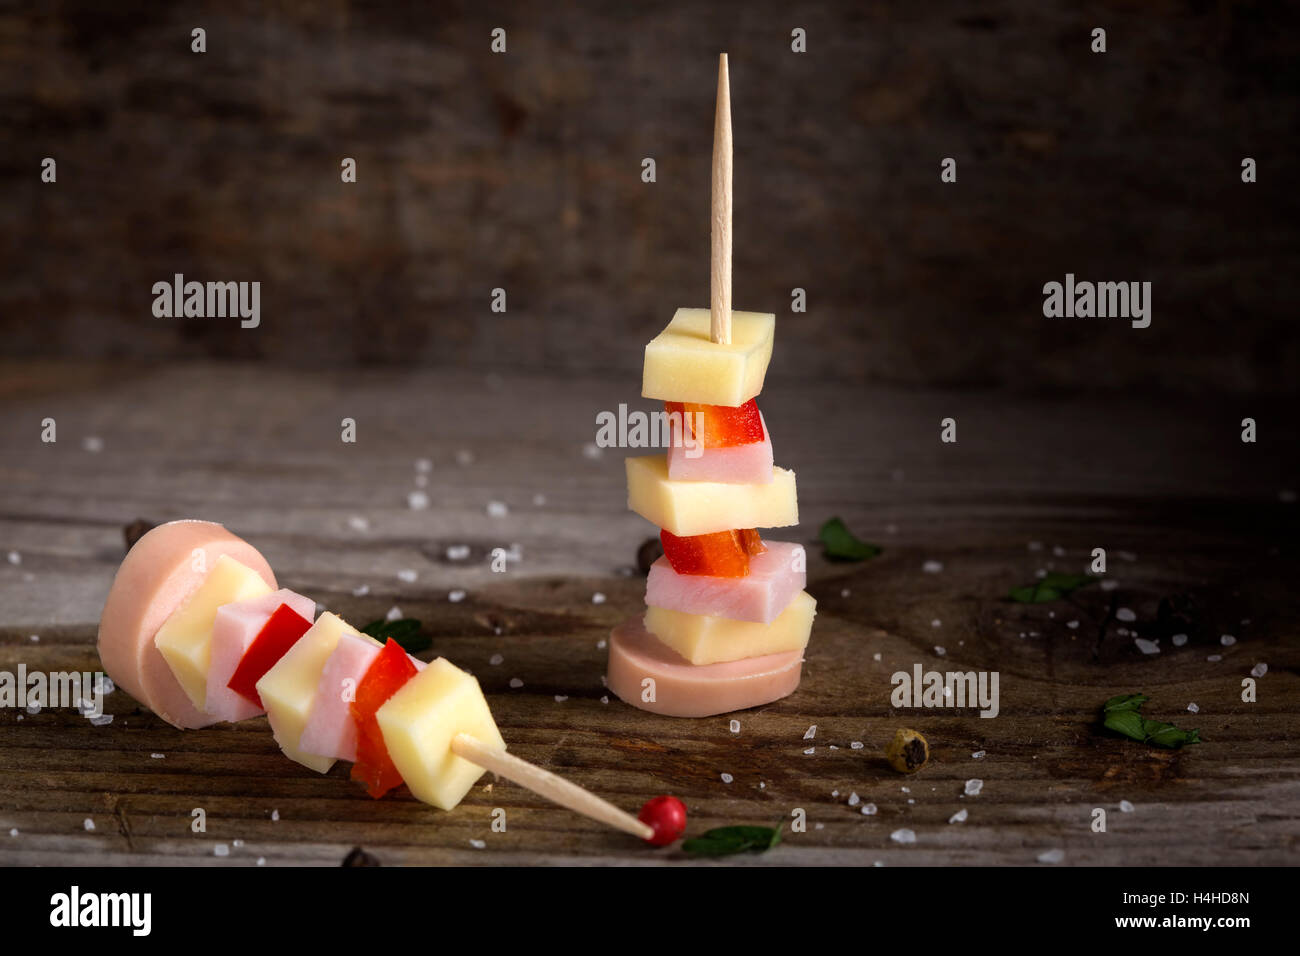 Ham, cheese and red pepper appetizer with spices over wooden background Stock Photo